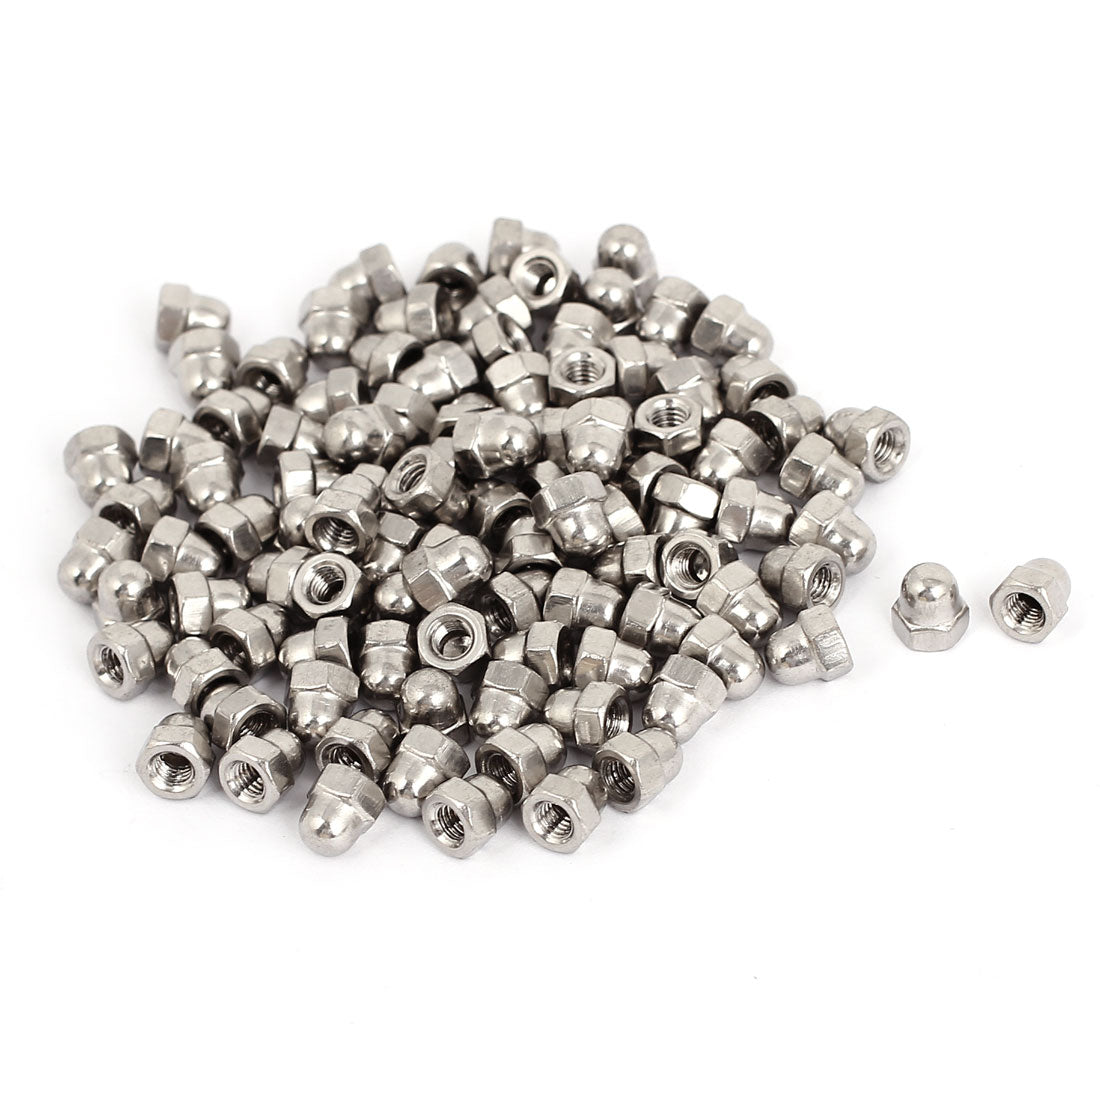 Uxcell Uxcell M3 304 Stainless Steel Dome Head Cap Acorn Hex Nuts Silver Tone 100pcs